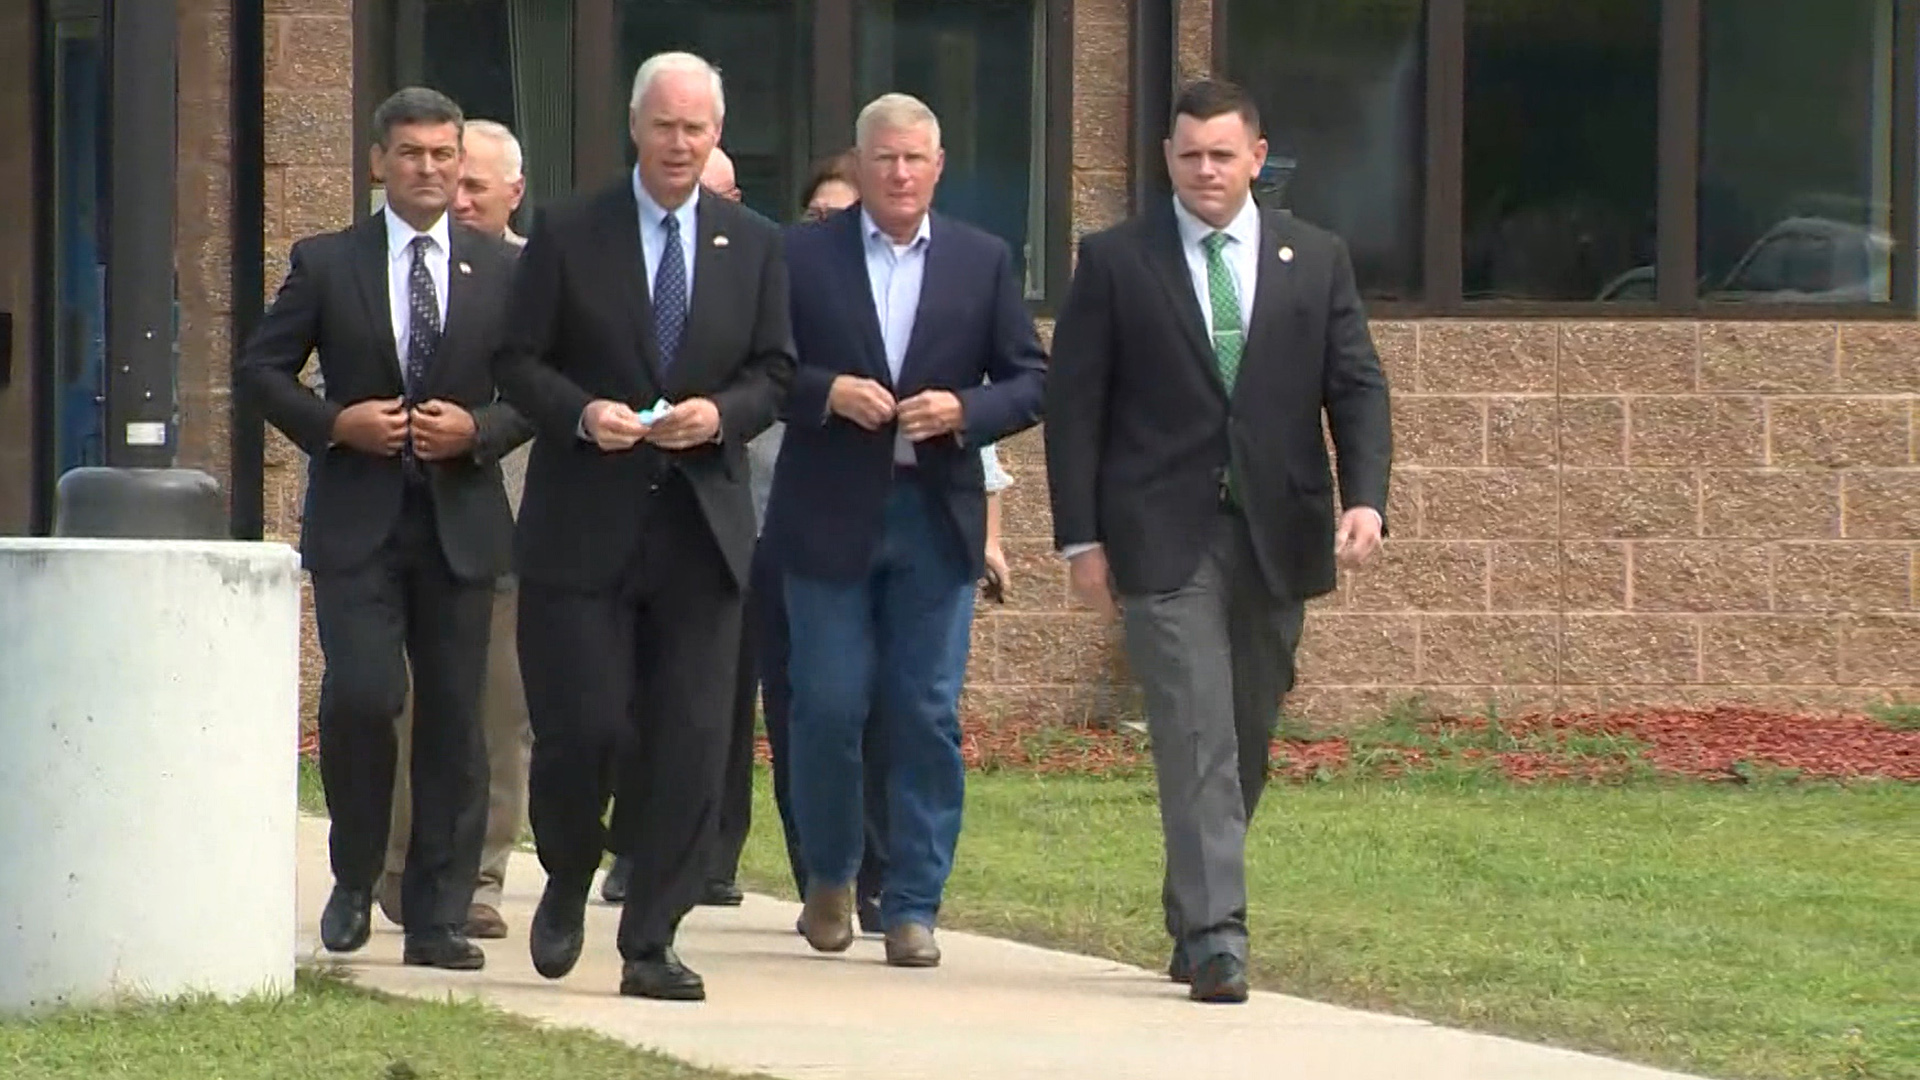 Ron Johnson and other law makers walk down a sidewalk from the entrance of a building.